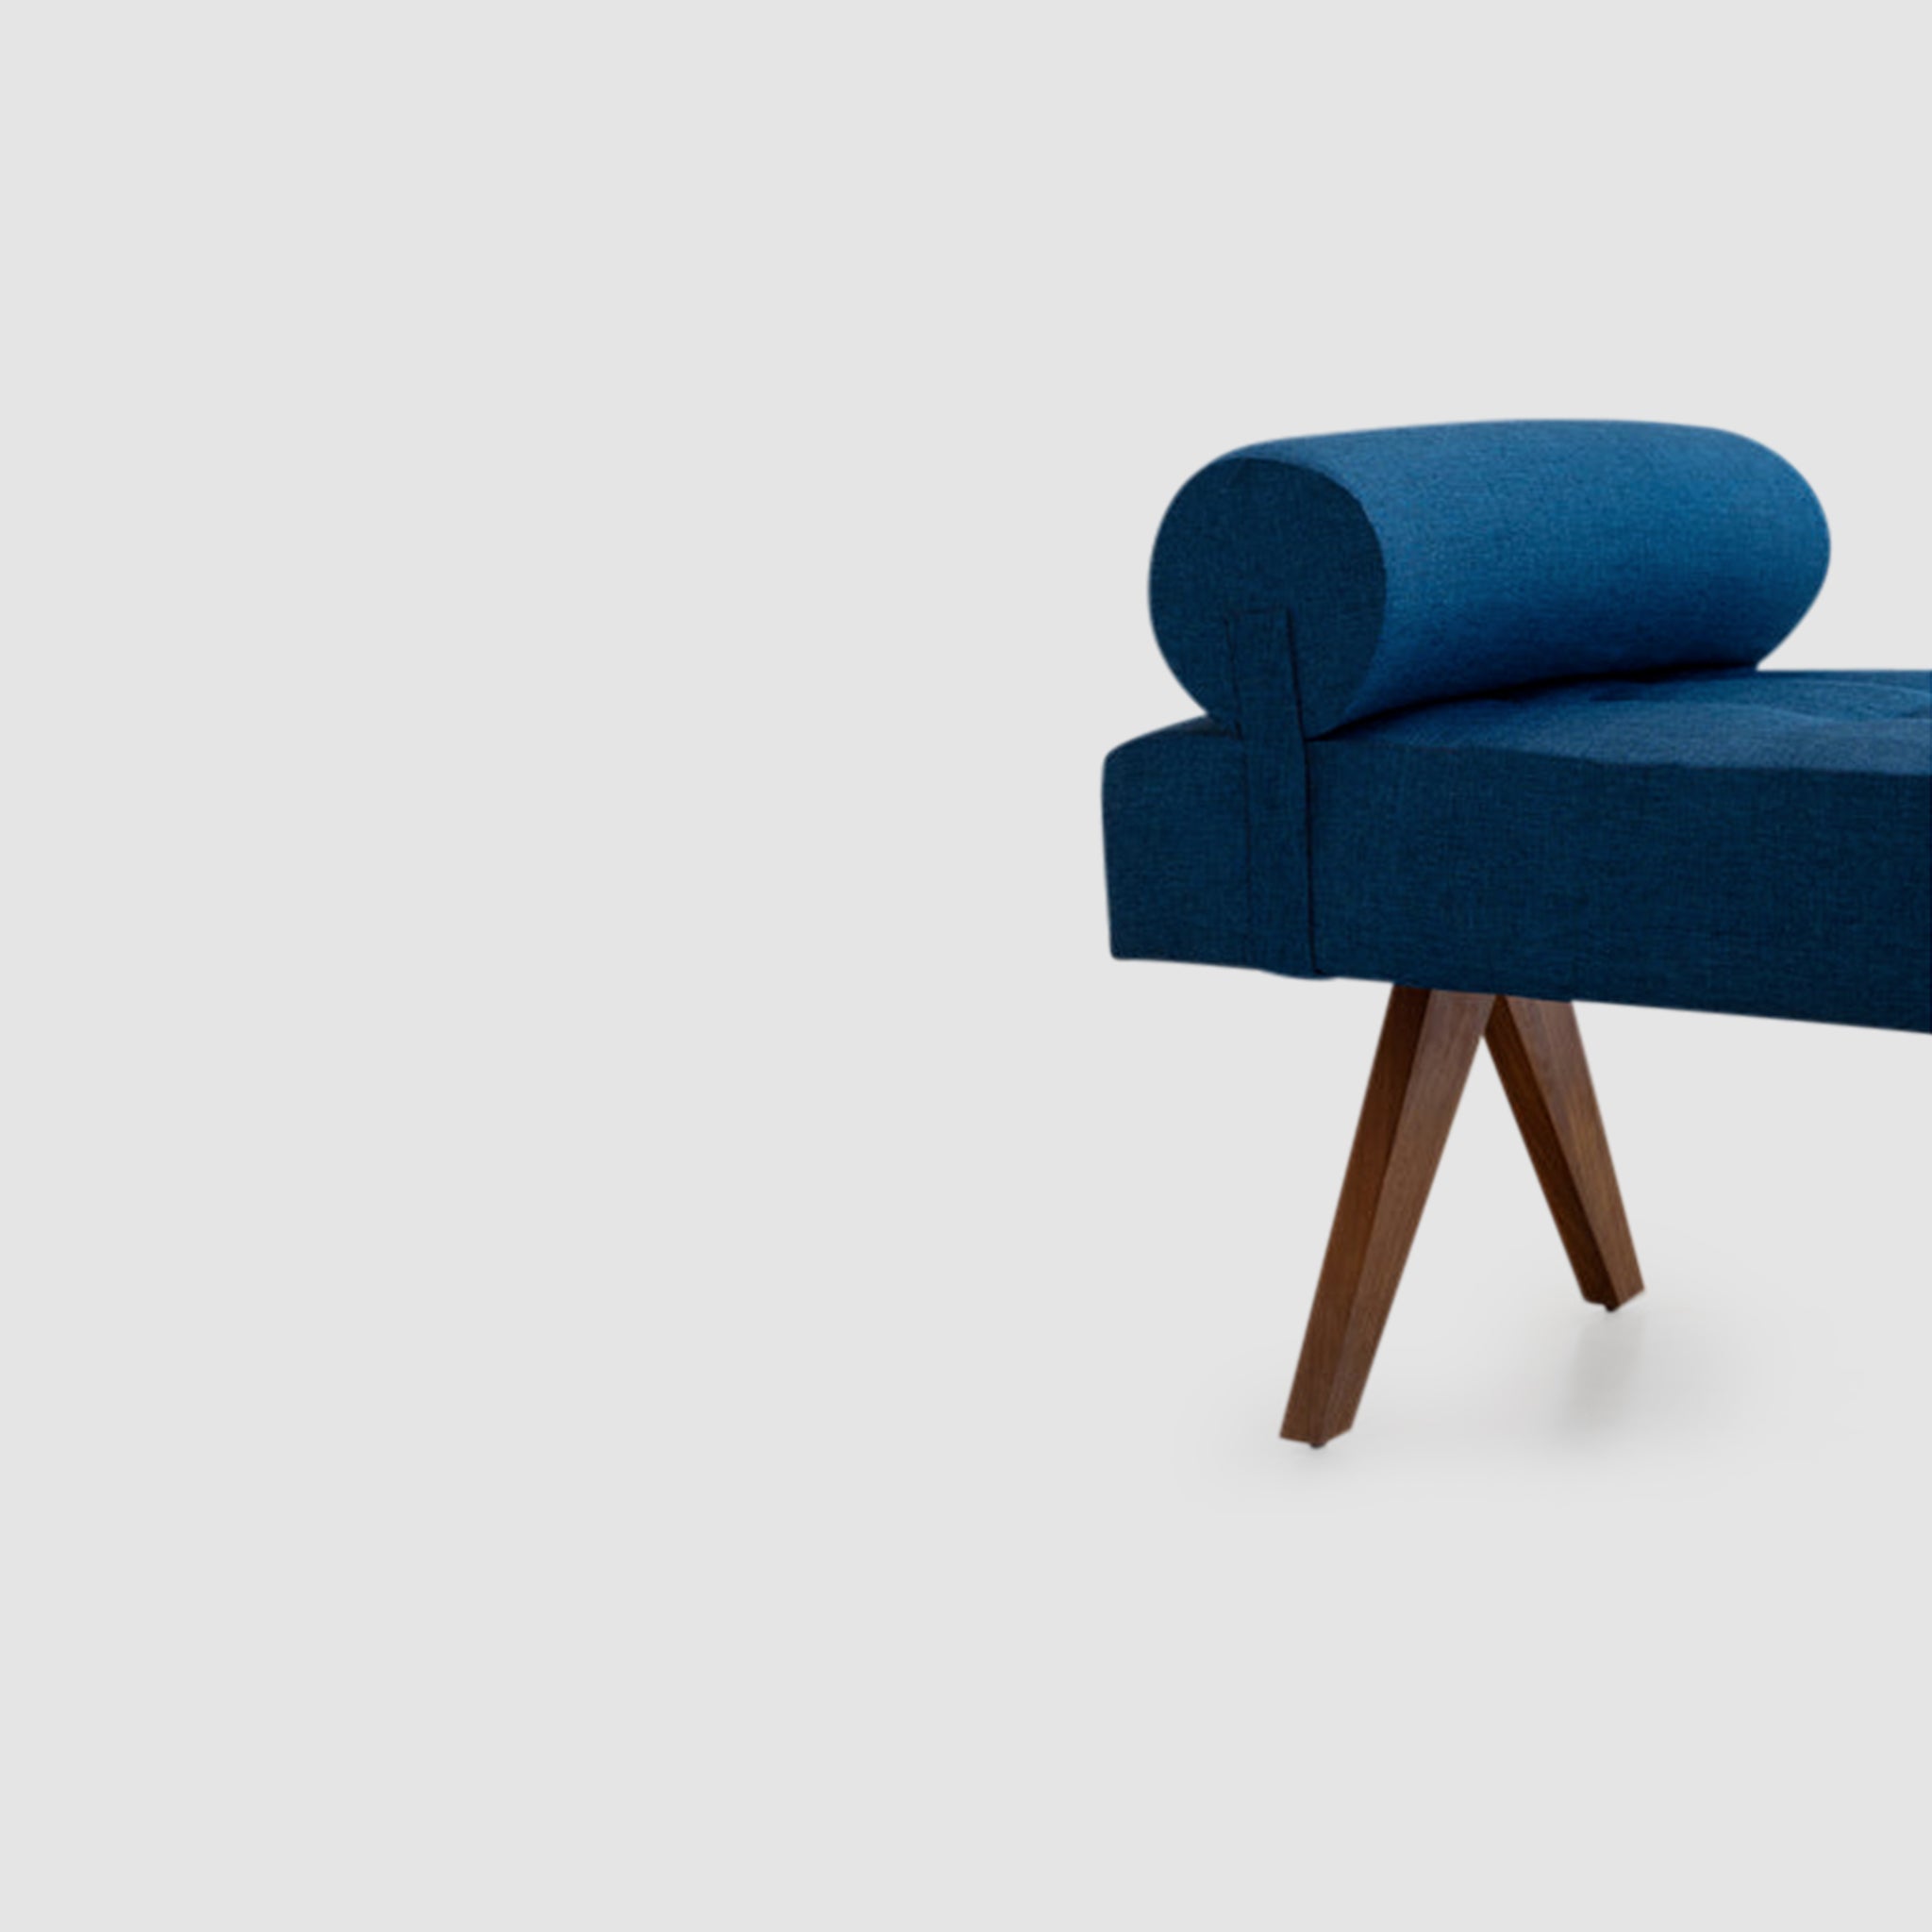 The Jack Daybed with deep blue upholstery